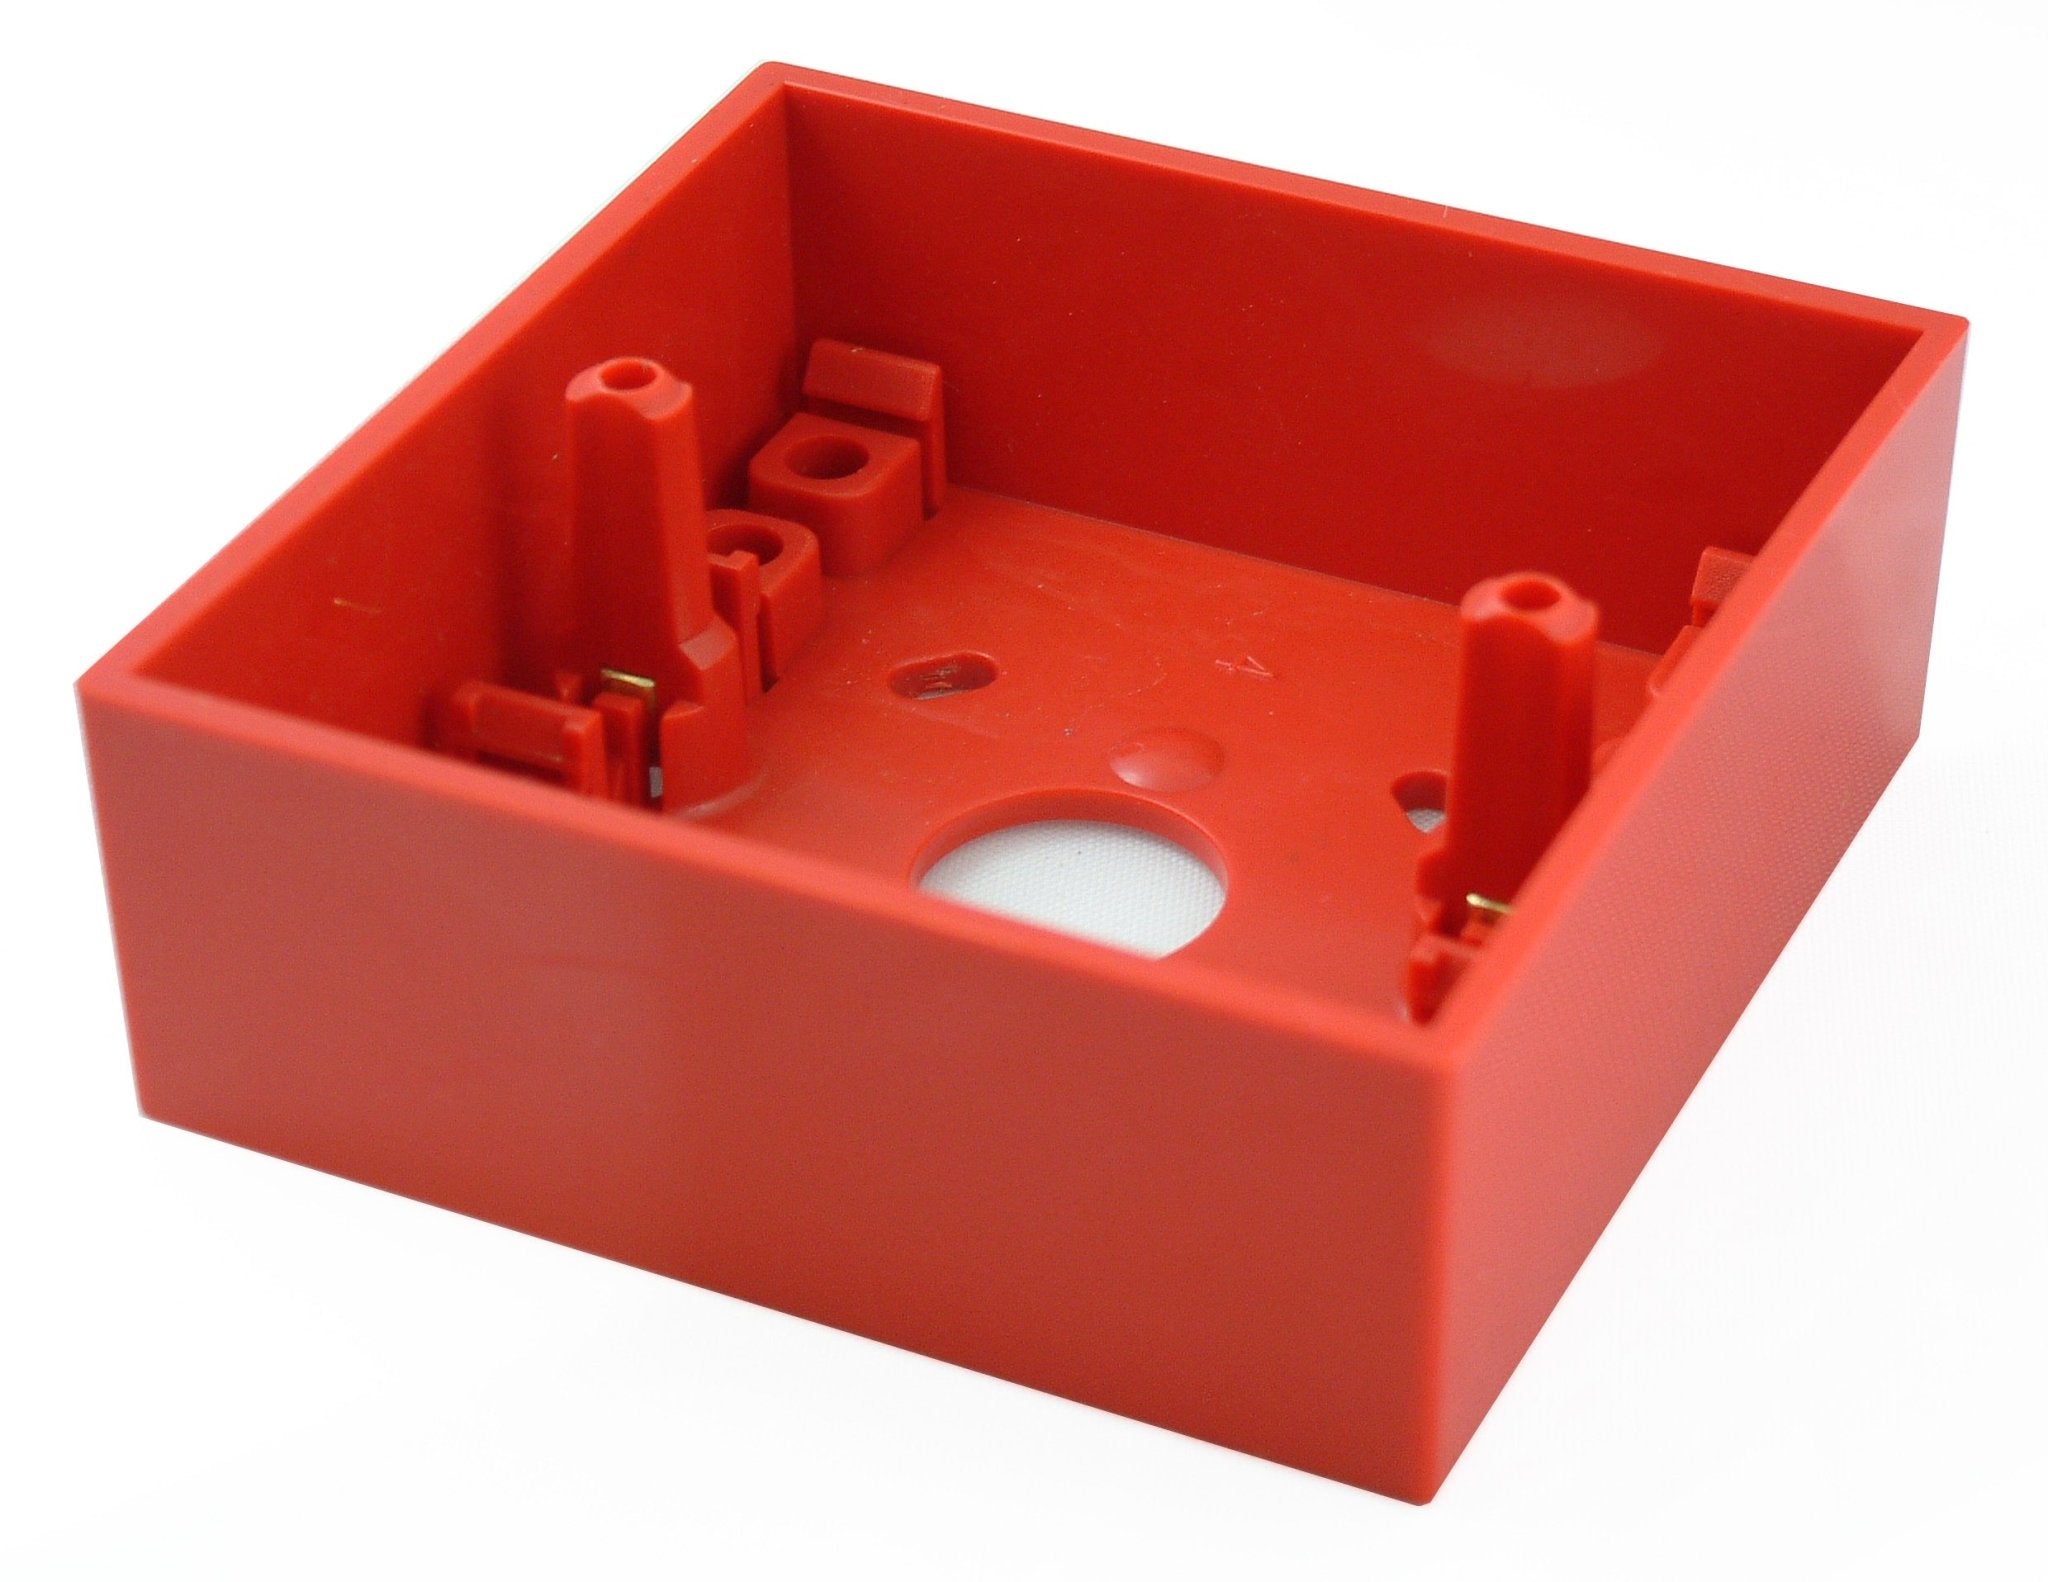 XENS-895 Surface Back box for XENS-8xx range (pack of 10) - Fire Trade Supplies